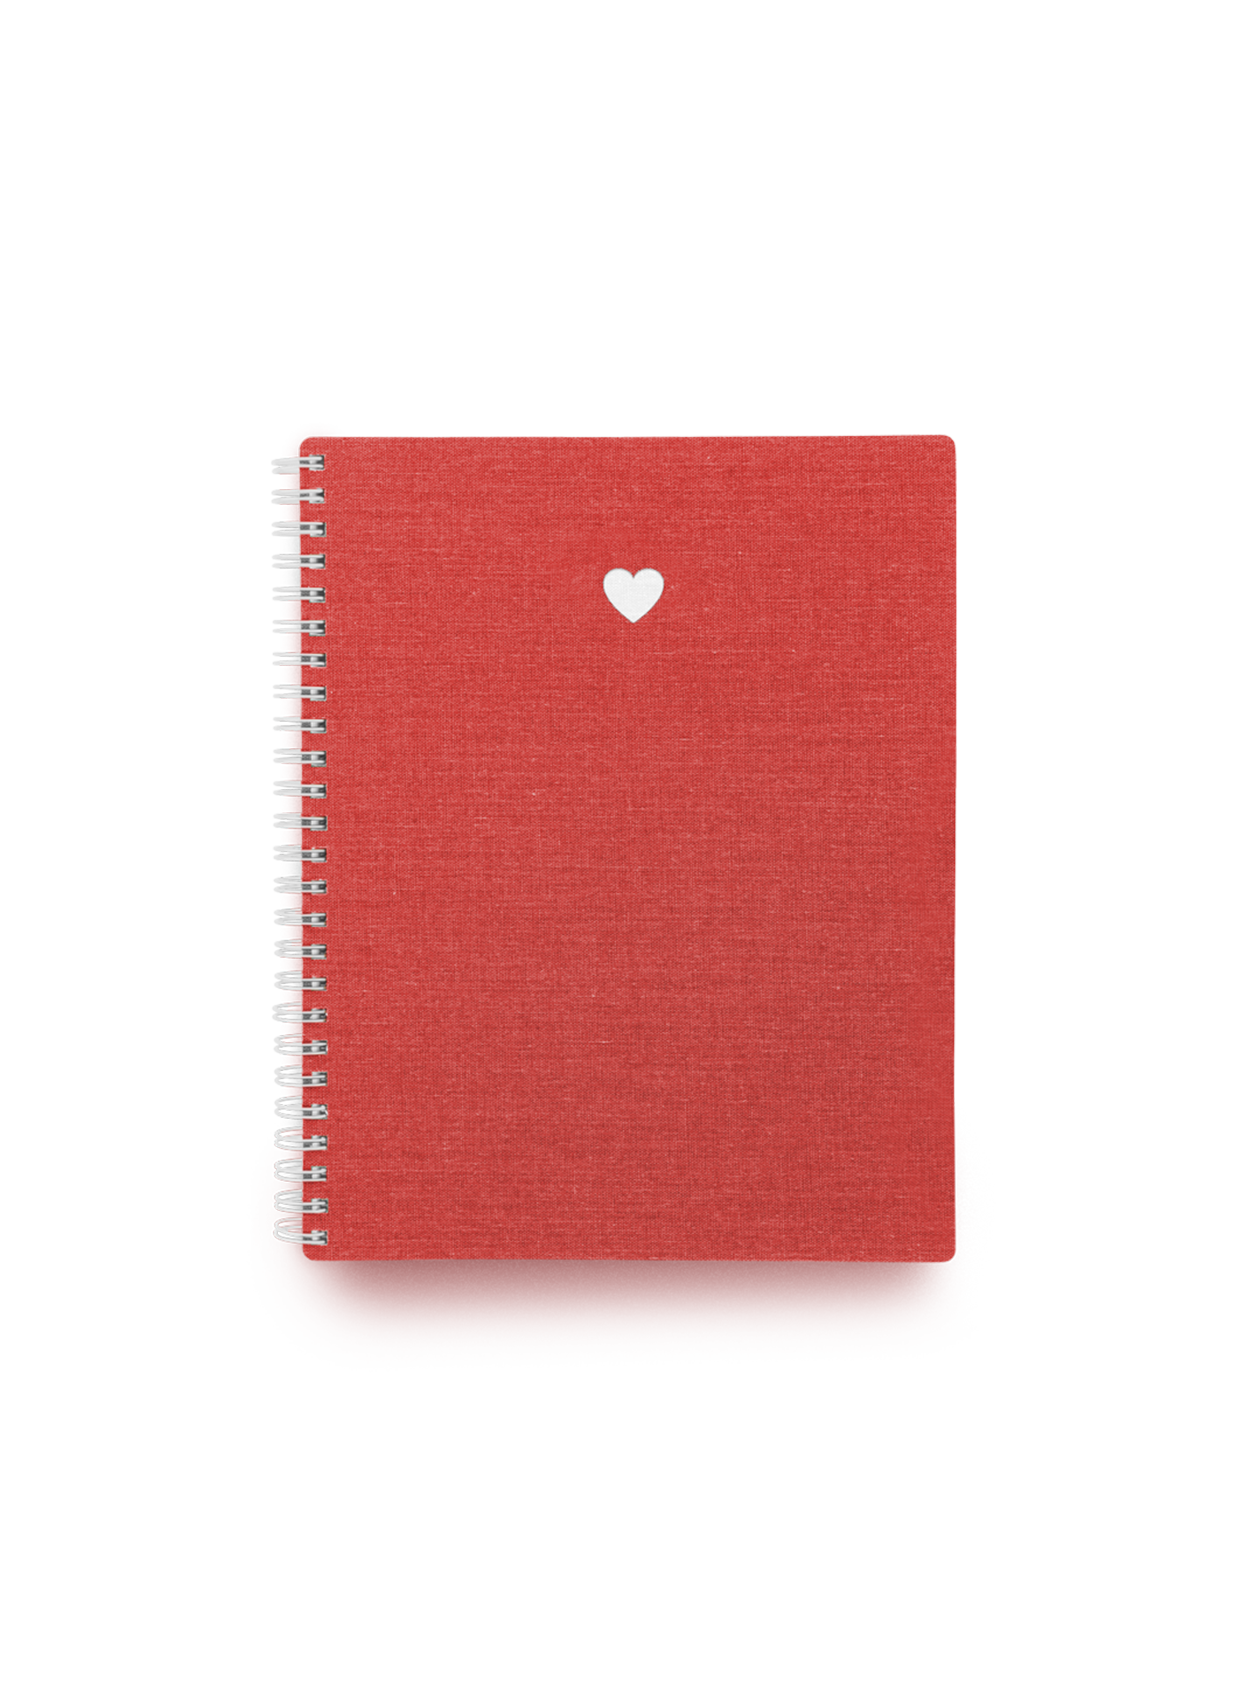 "Heart" Workbook in Strawberry Red: Grid/Blank Pages